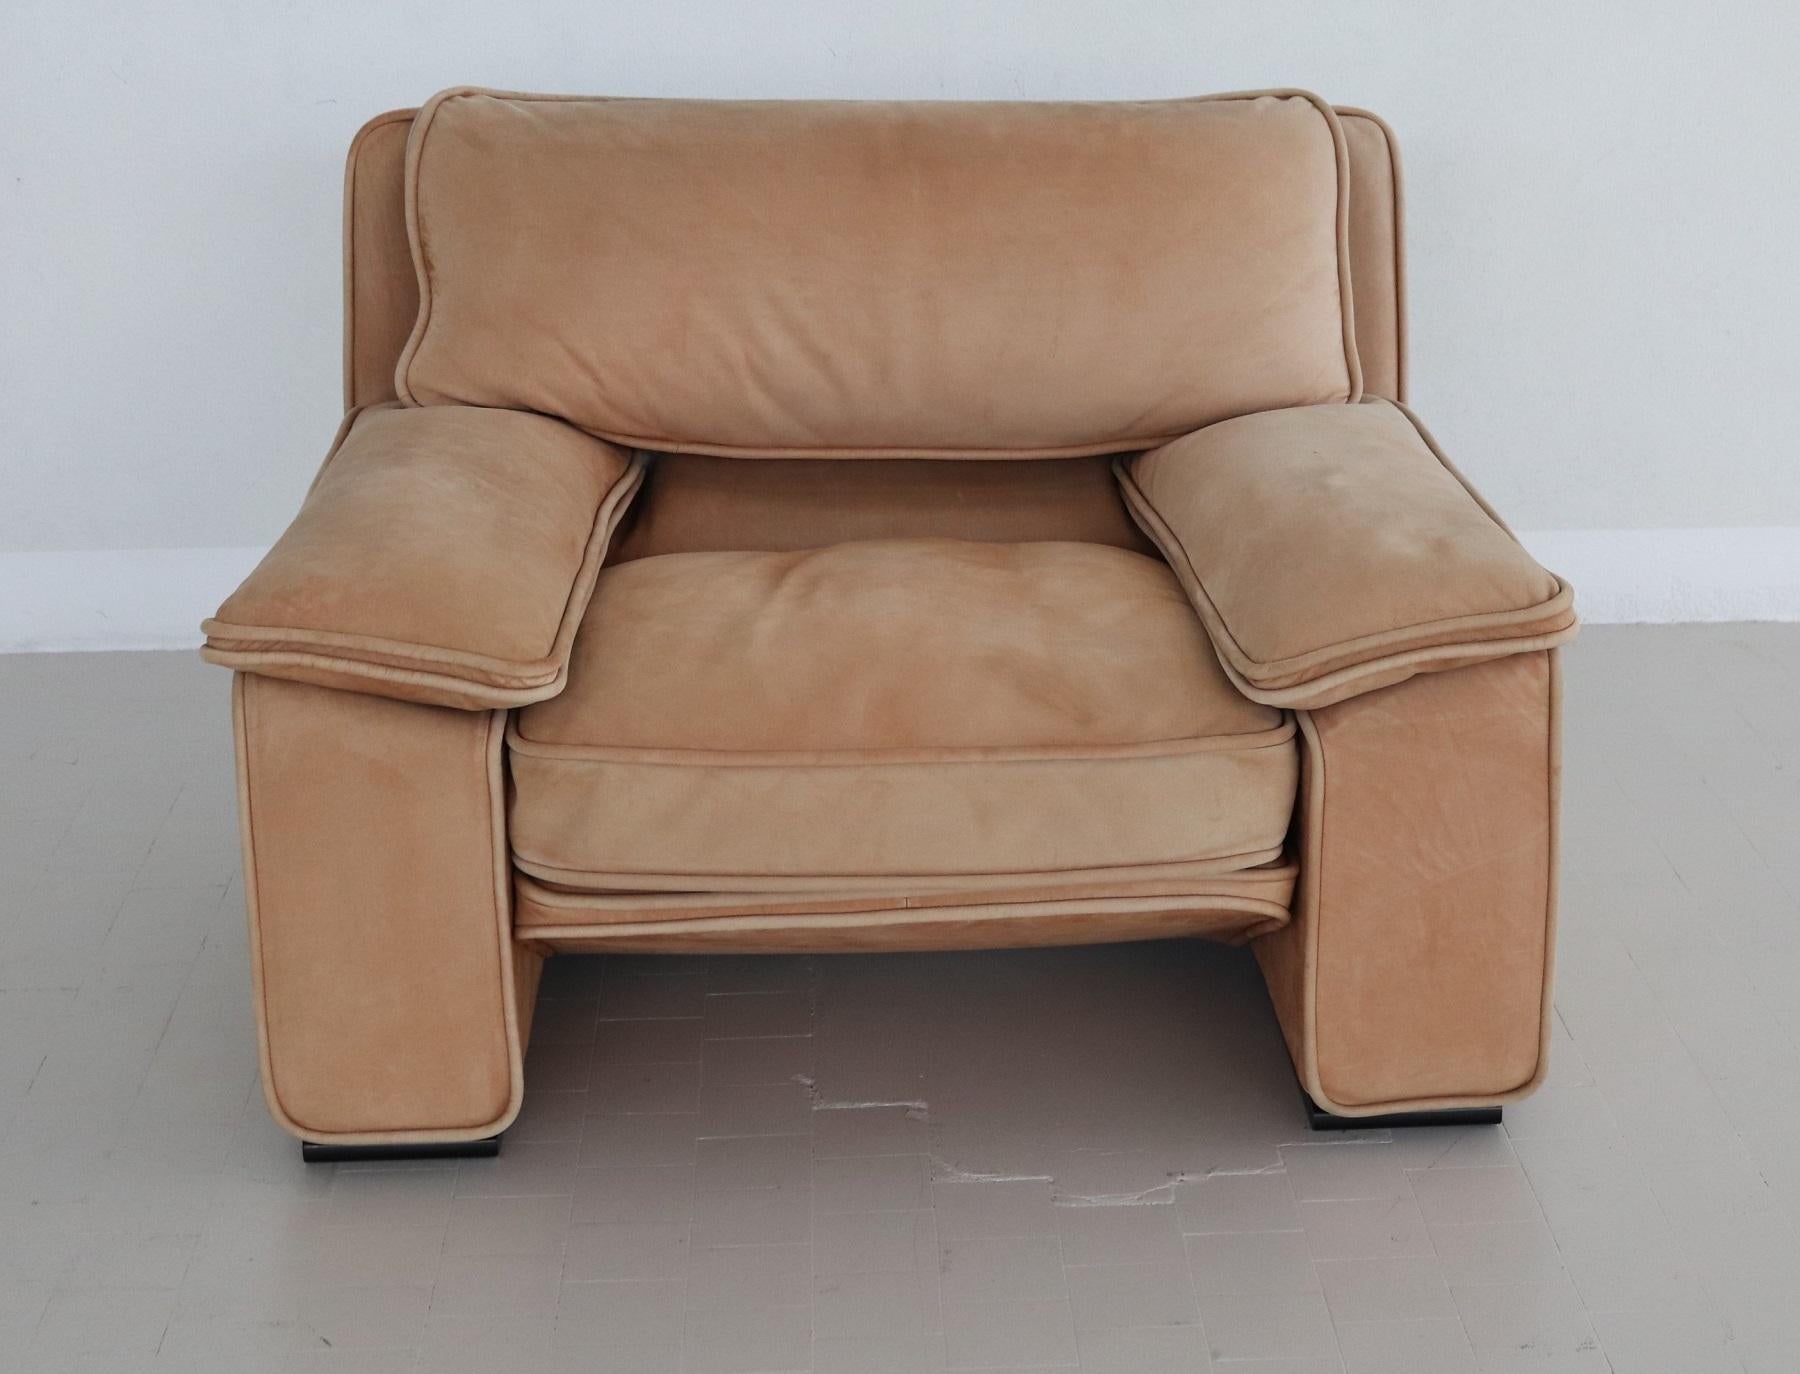 Handsome Italian vintage 1 seater Nappa leather sofa, incredibly comfortable and stylish! 
Made in Italy in the 1970s by Brunati.
Nappa leather is made from full-grain, un-split animal hide and not modified in any way. Just the hair is removed from